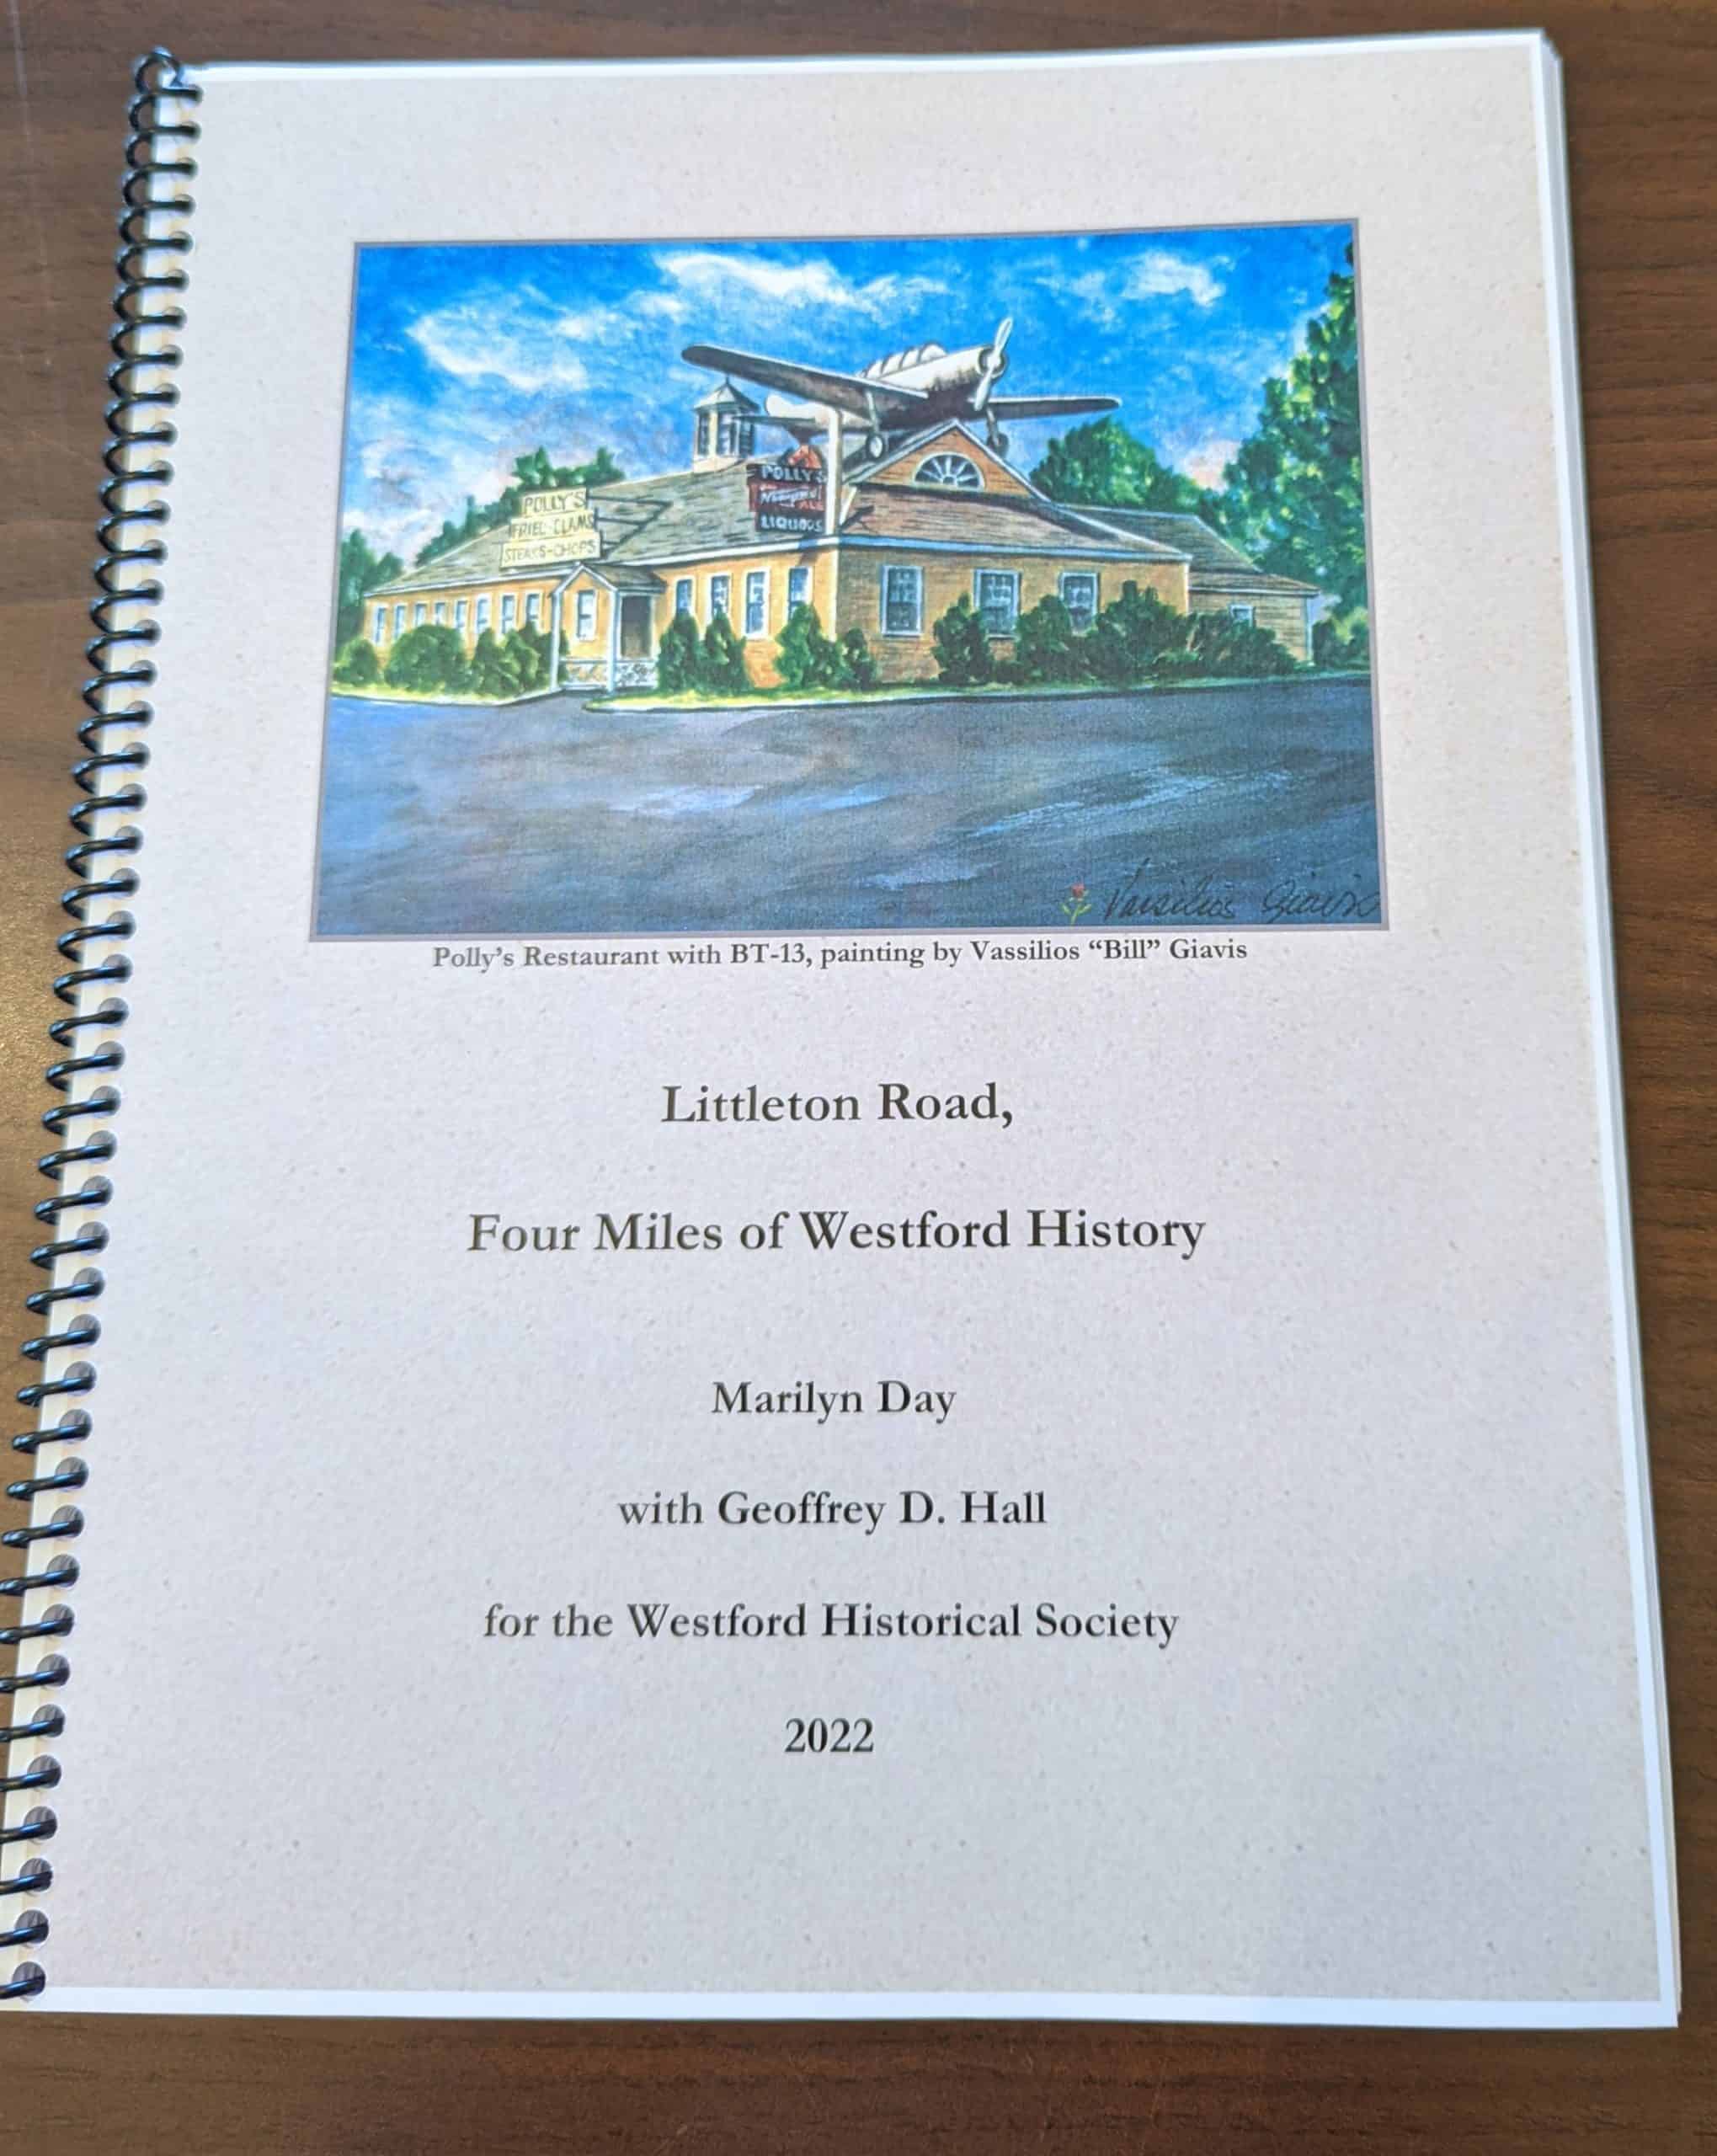 At the Westford Academy Bazaar, Westford Town Historians, Day and Hall will be autographing their book, "Littleton Road"